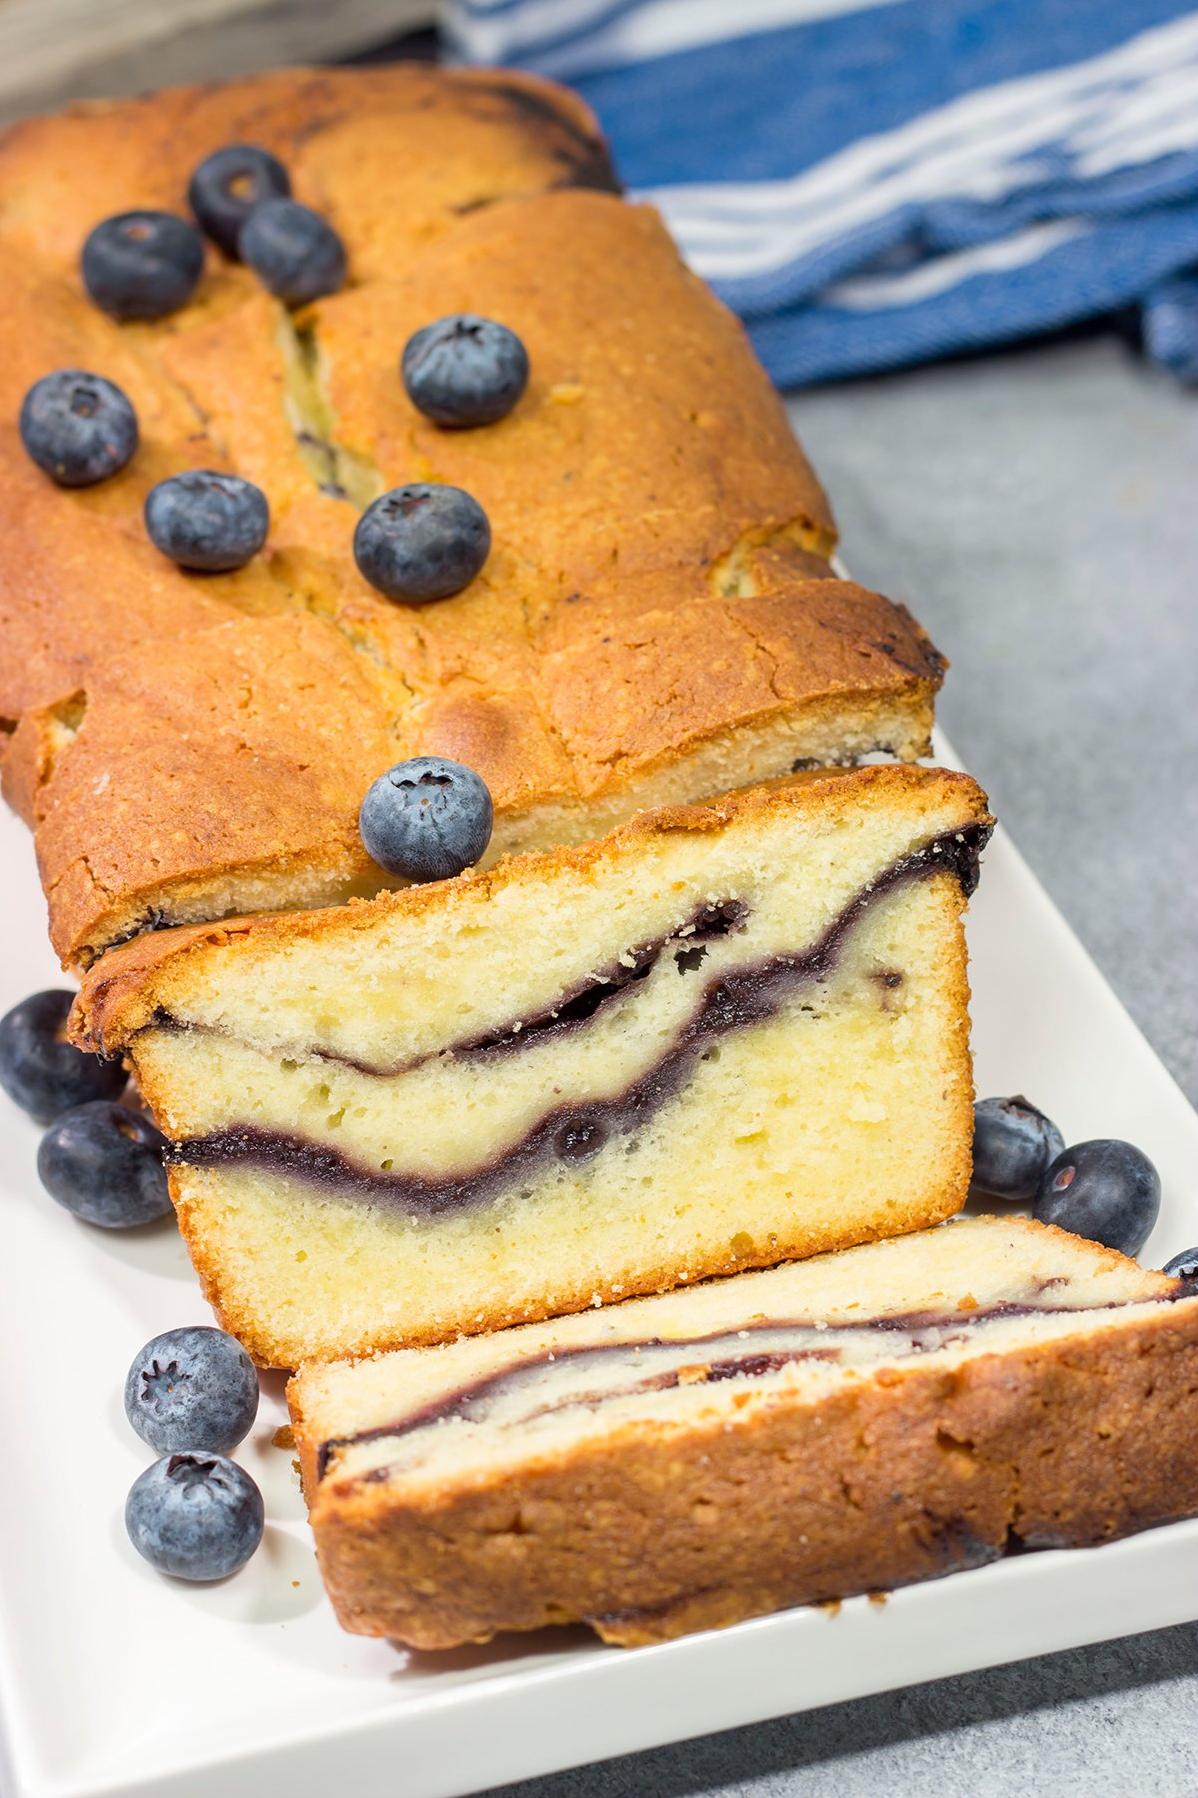  Soft and fluffy pound cake with a burst of blueberry flavor.